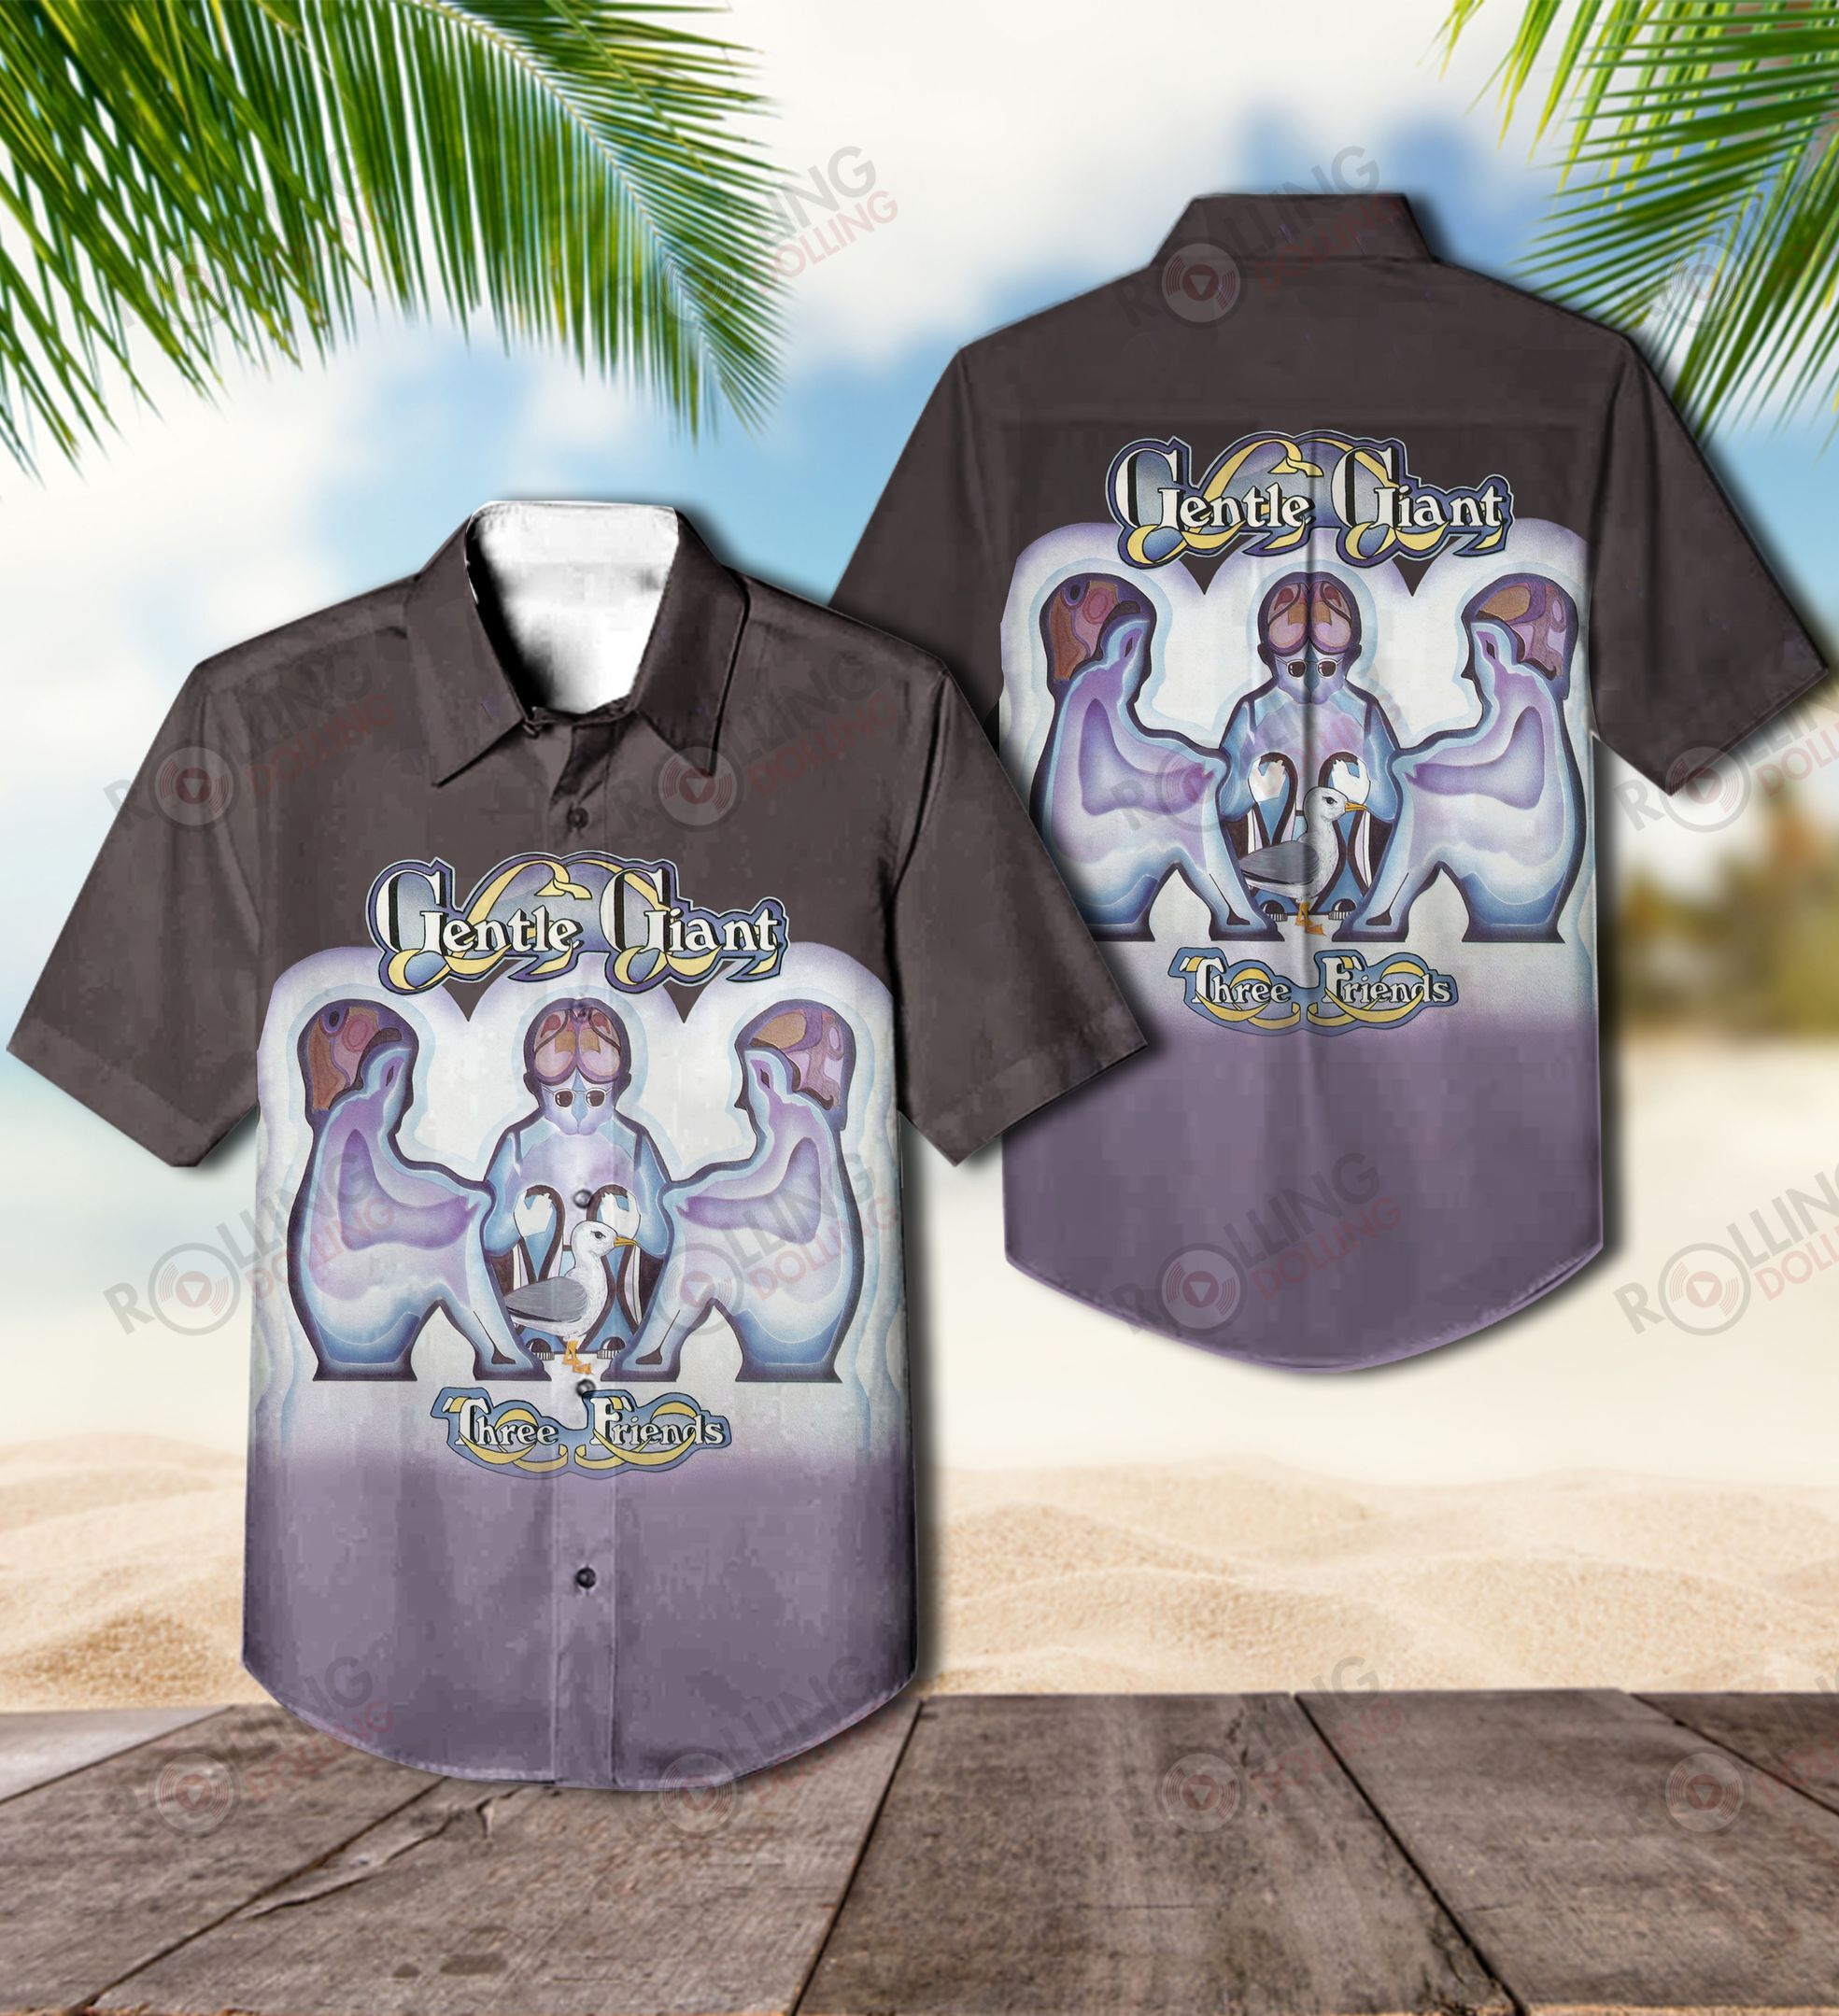 This would make a great gift for any fan who loves Hawaiian Shirt as well as Rock band 102